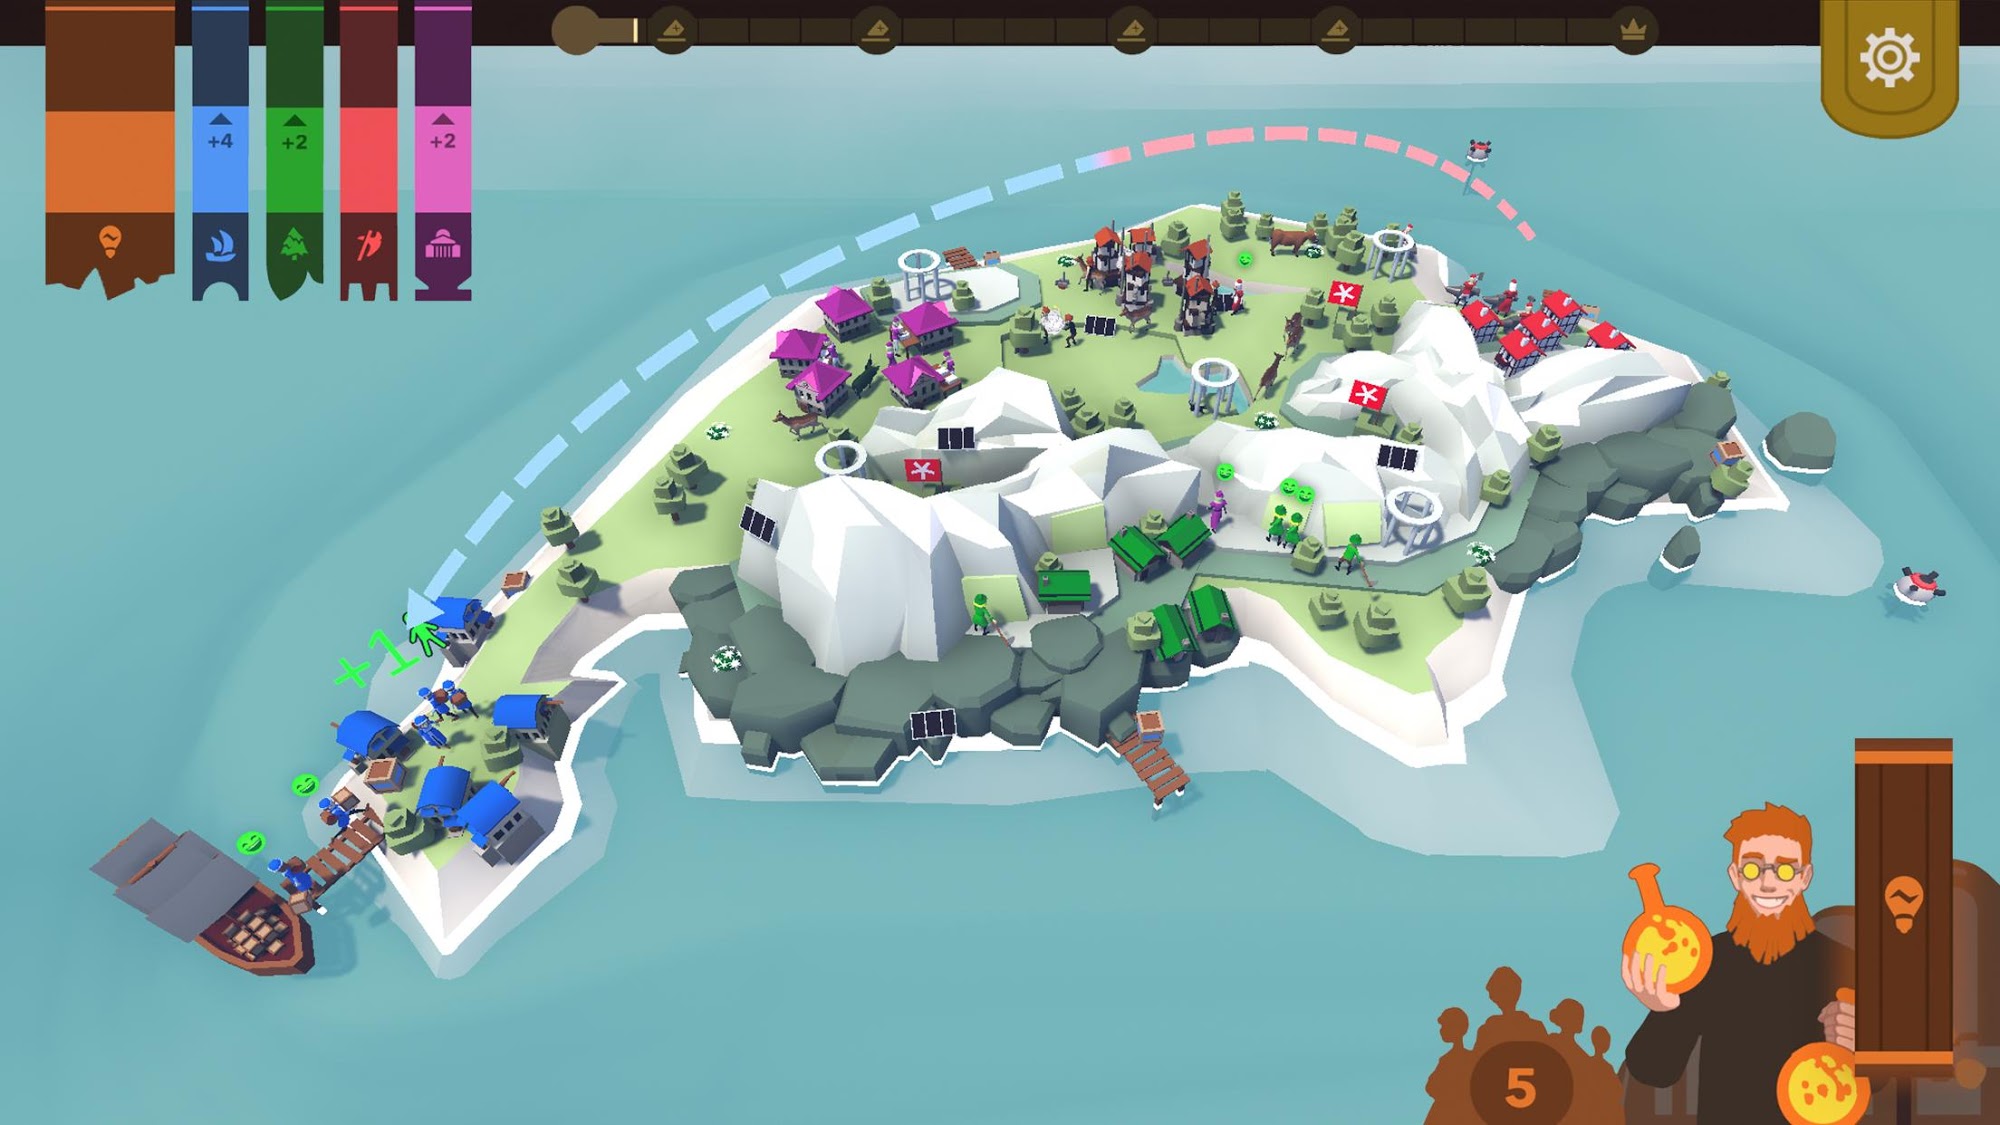 Democratia: The Isle of Five for Android